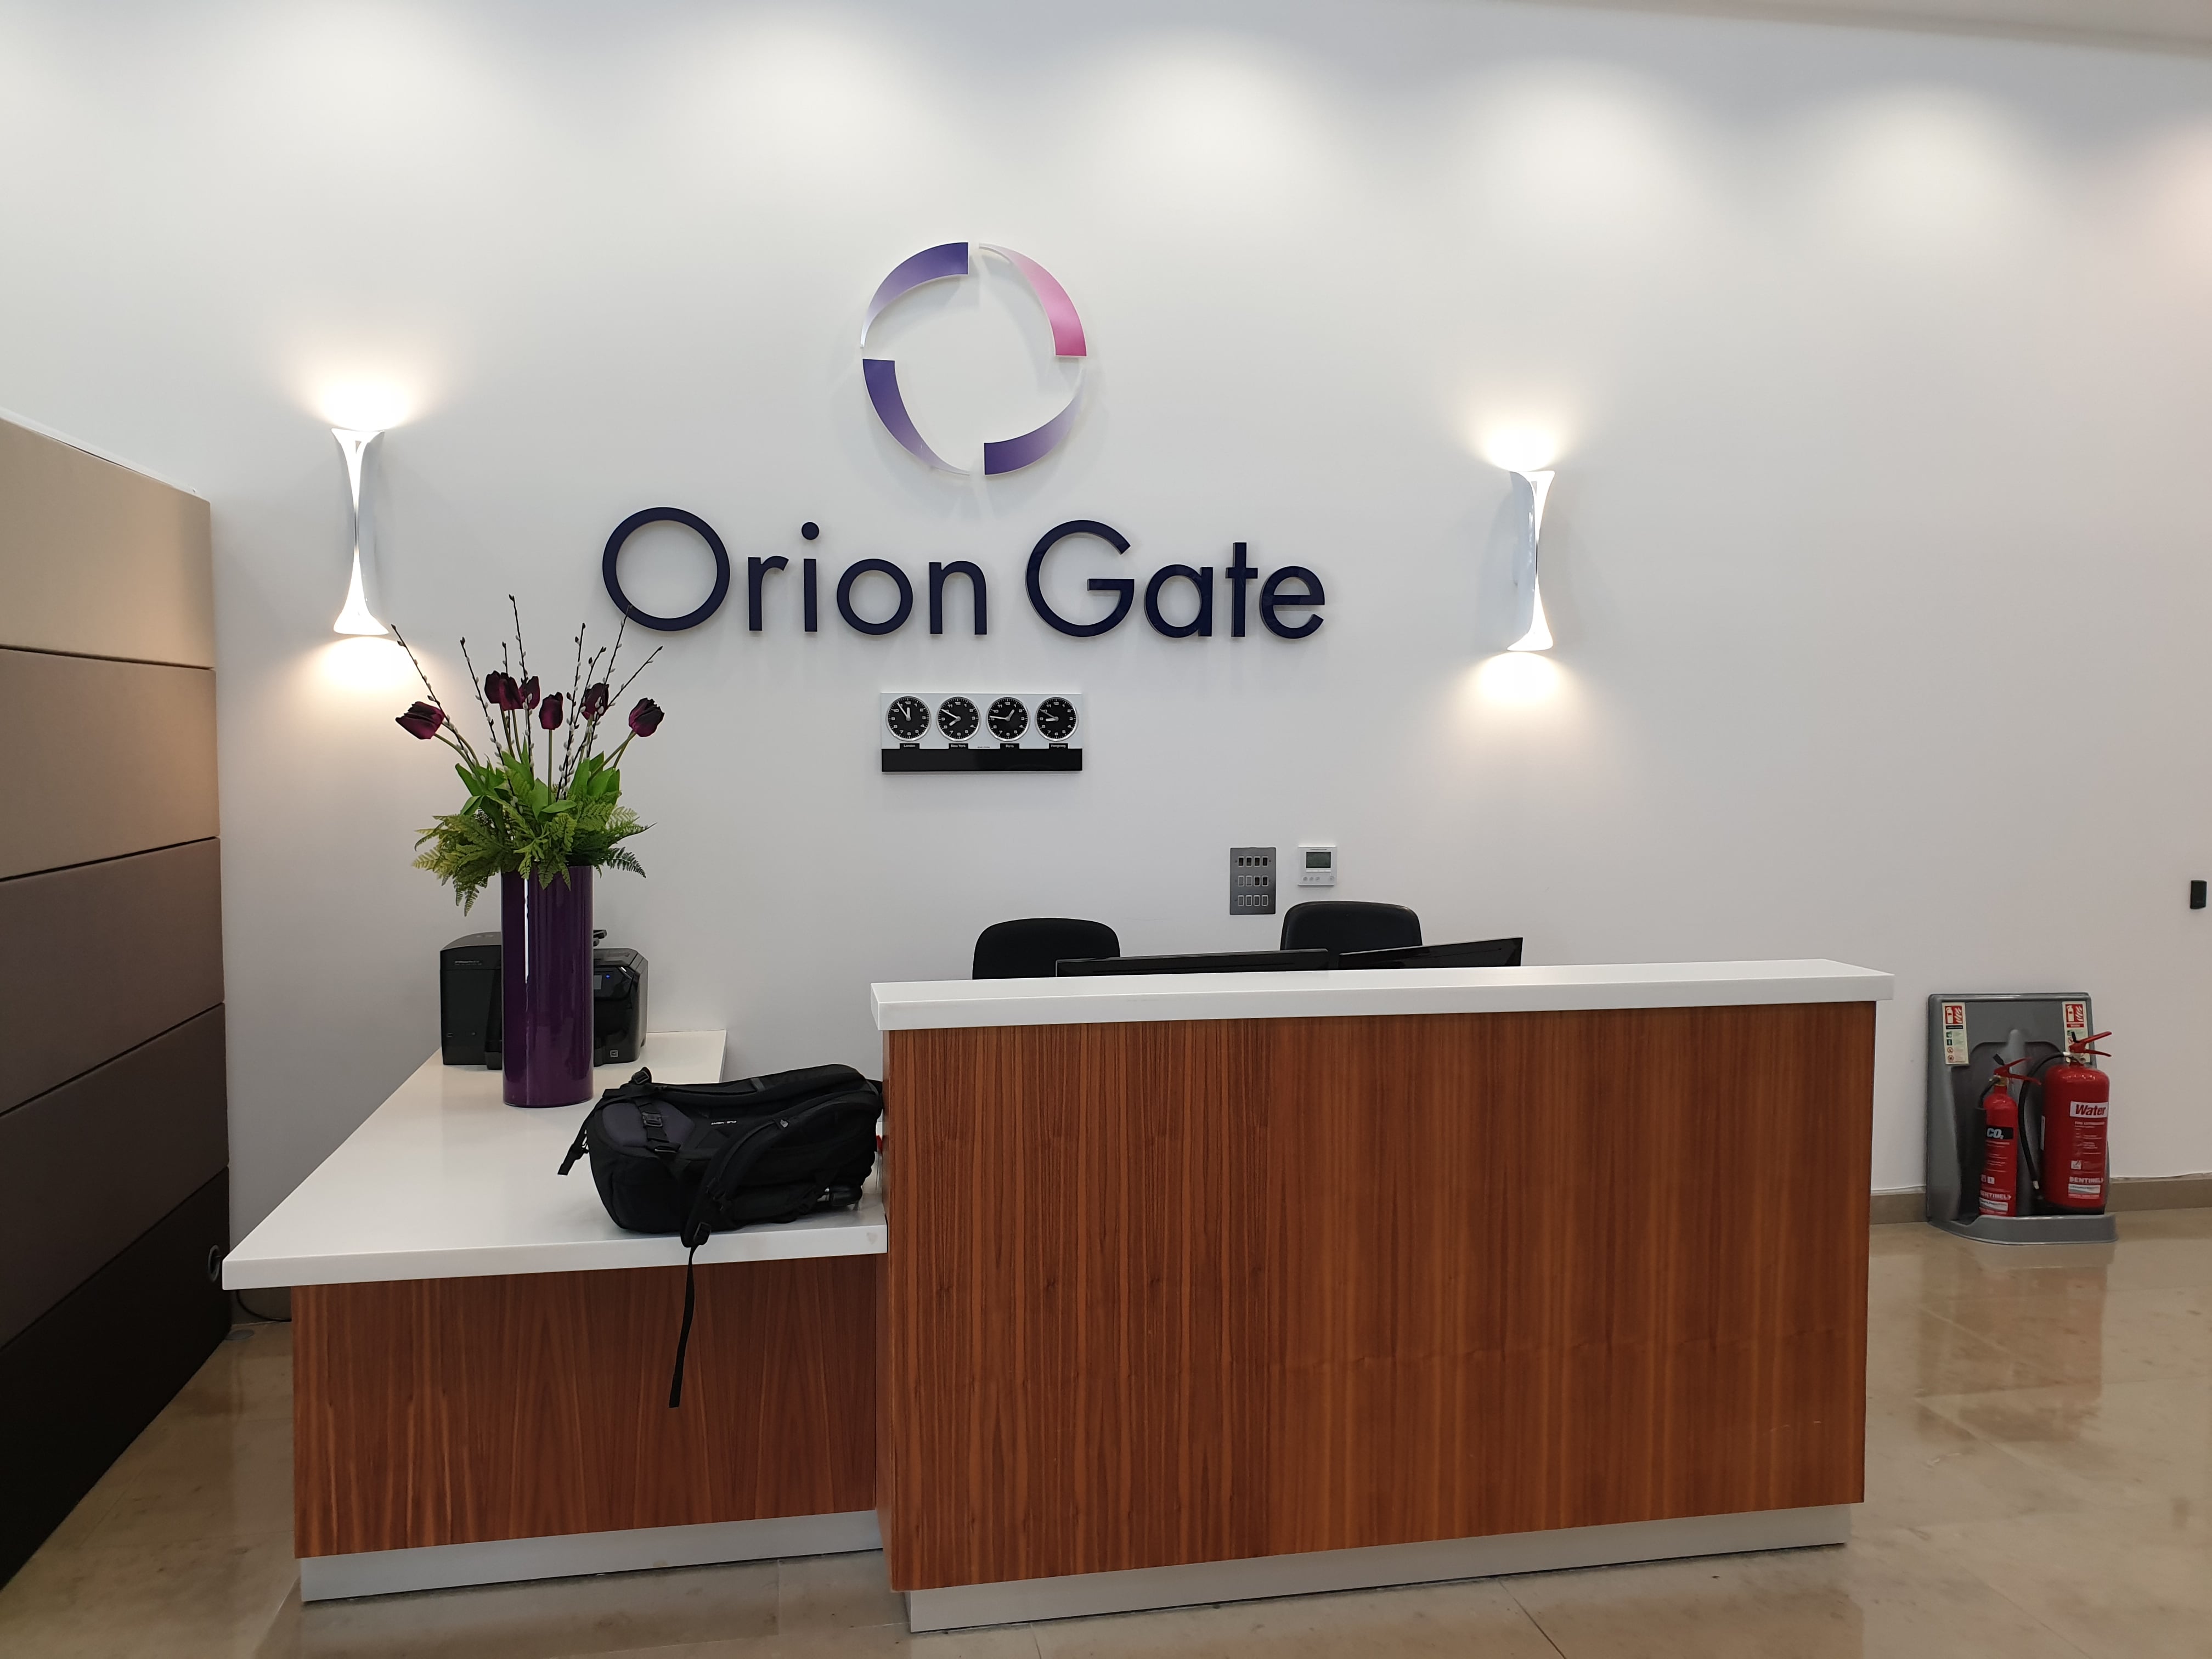 Orion Gate